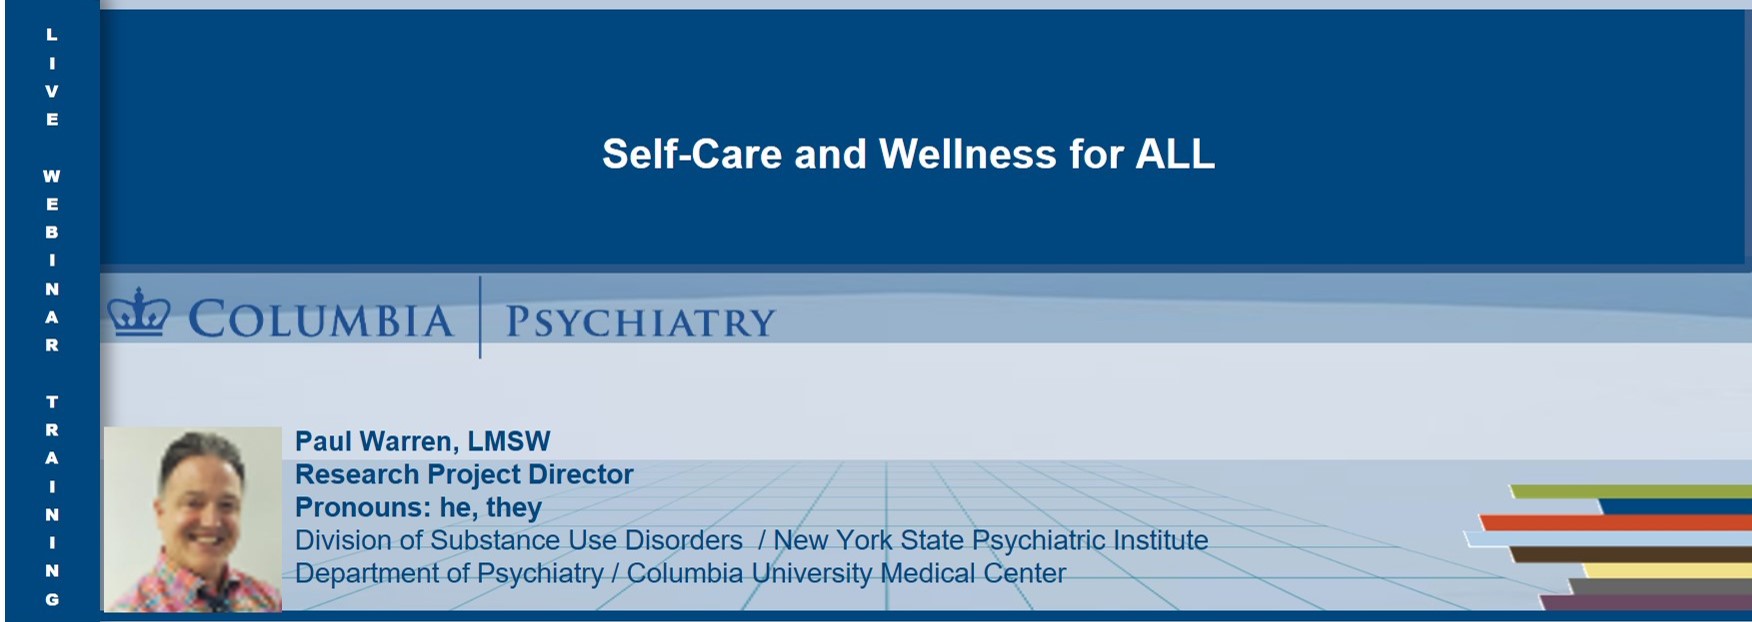 Self-Care and Wellness for ALL